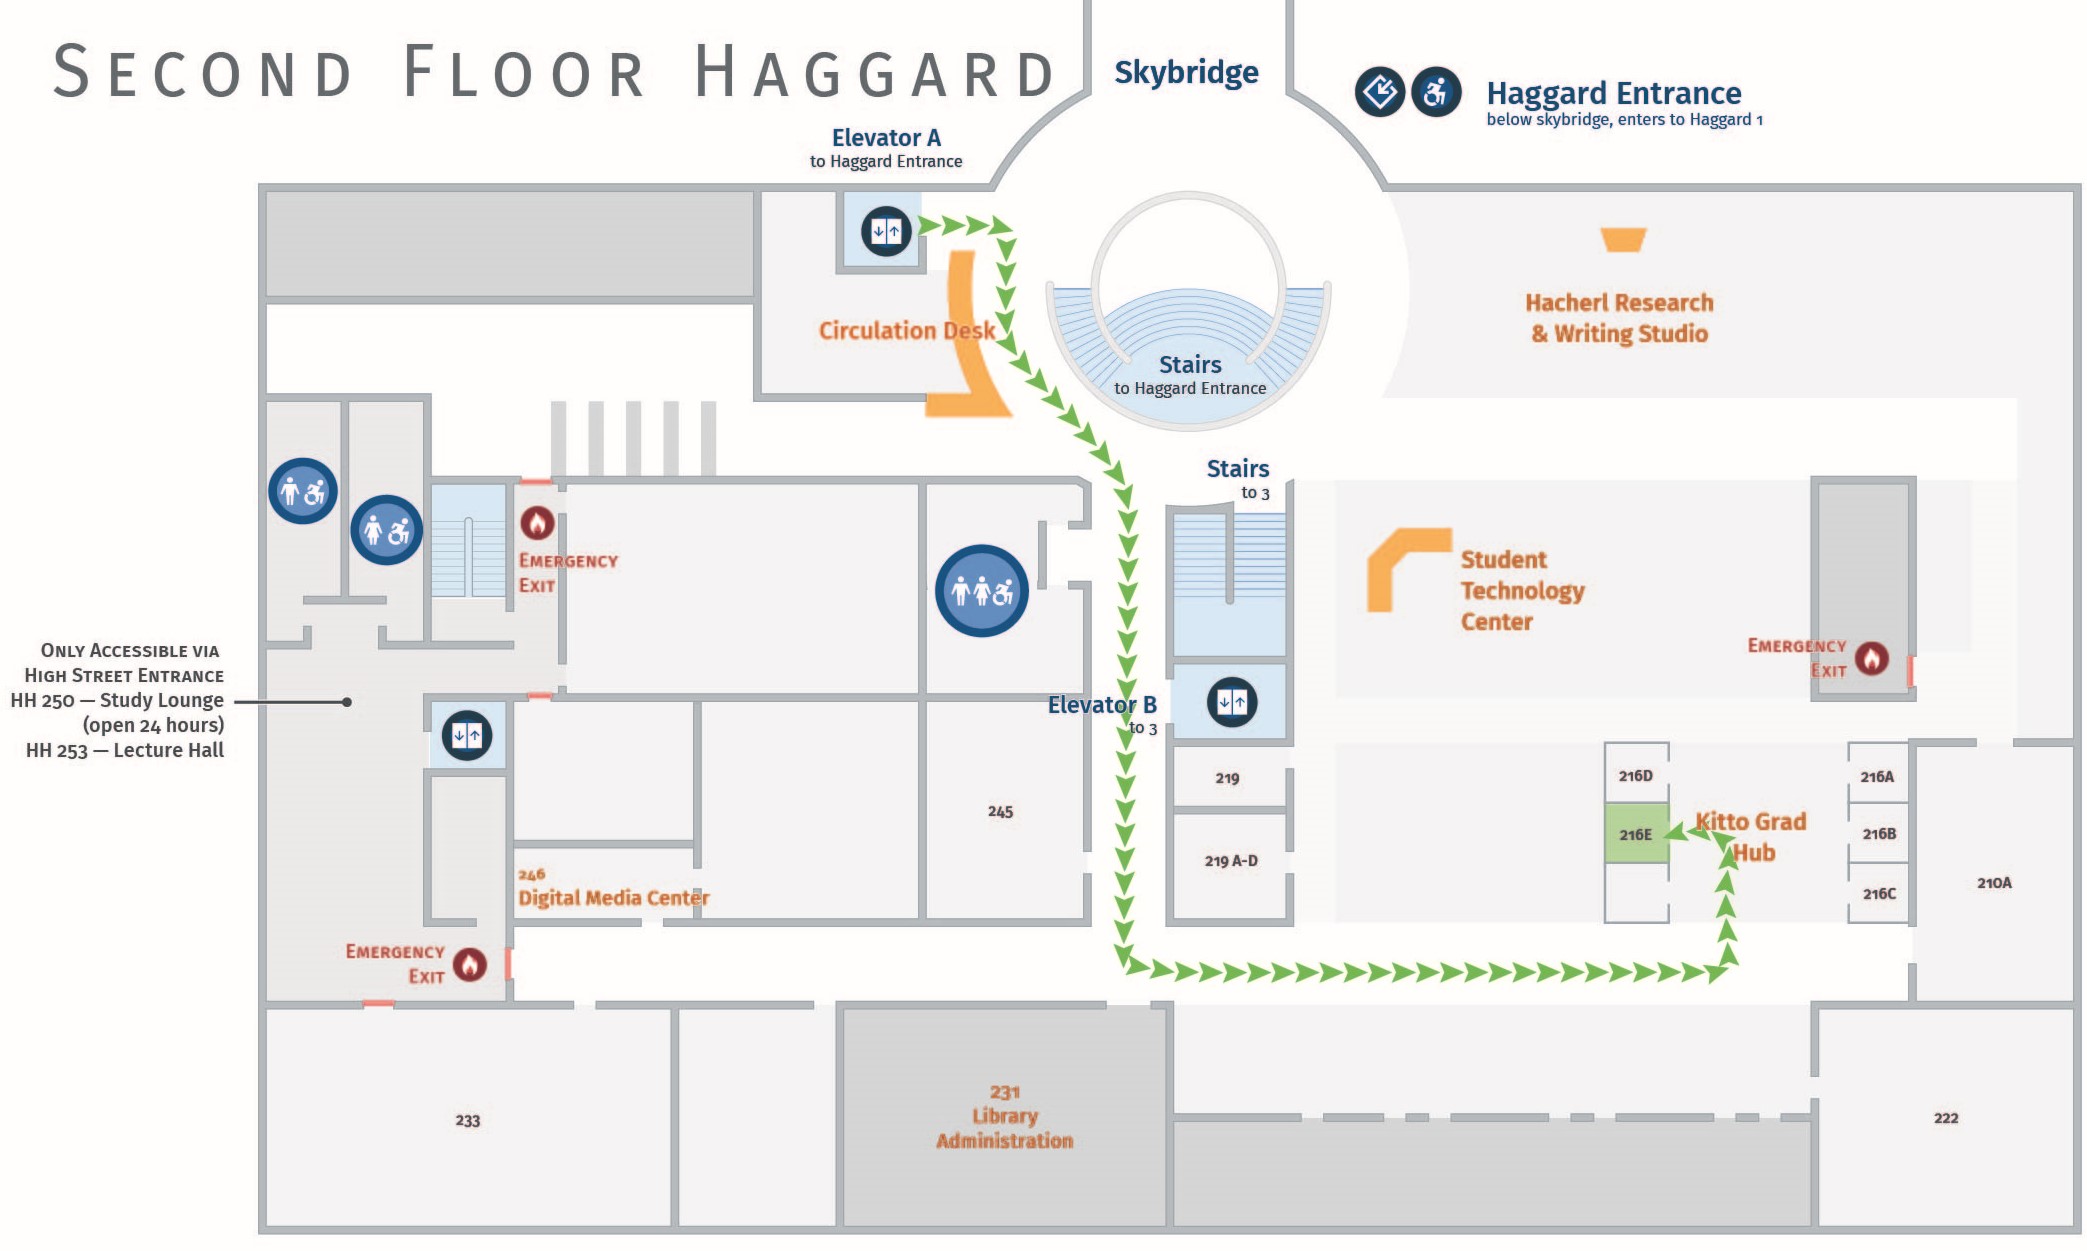 Floor plan, second floor Haggard with accessible path to HH 216E.